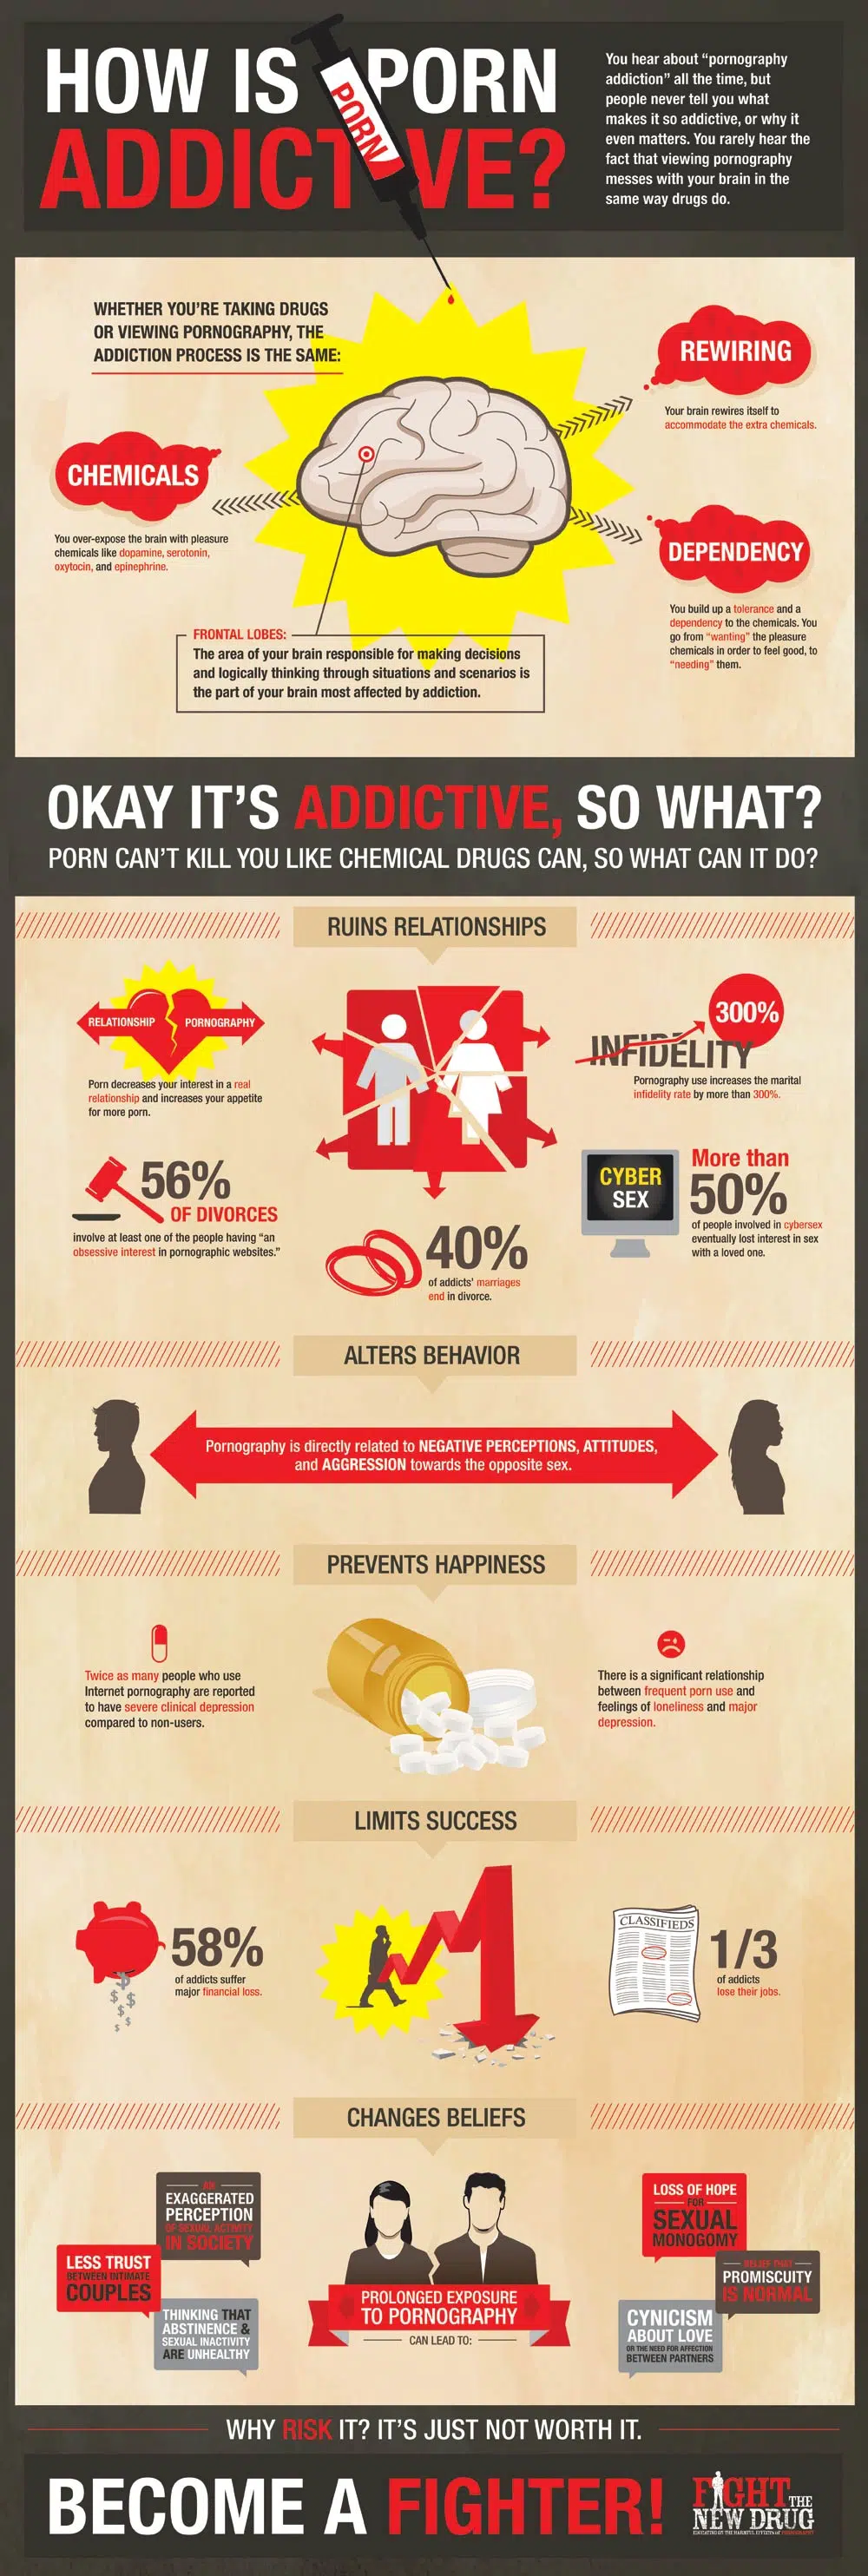 How addictive is porn infographic with statistics